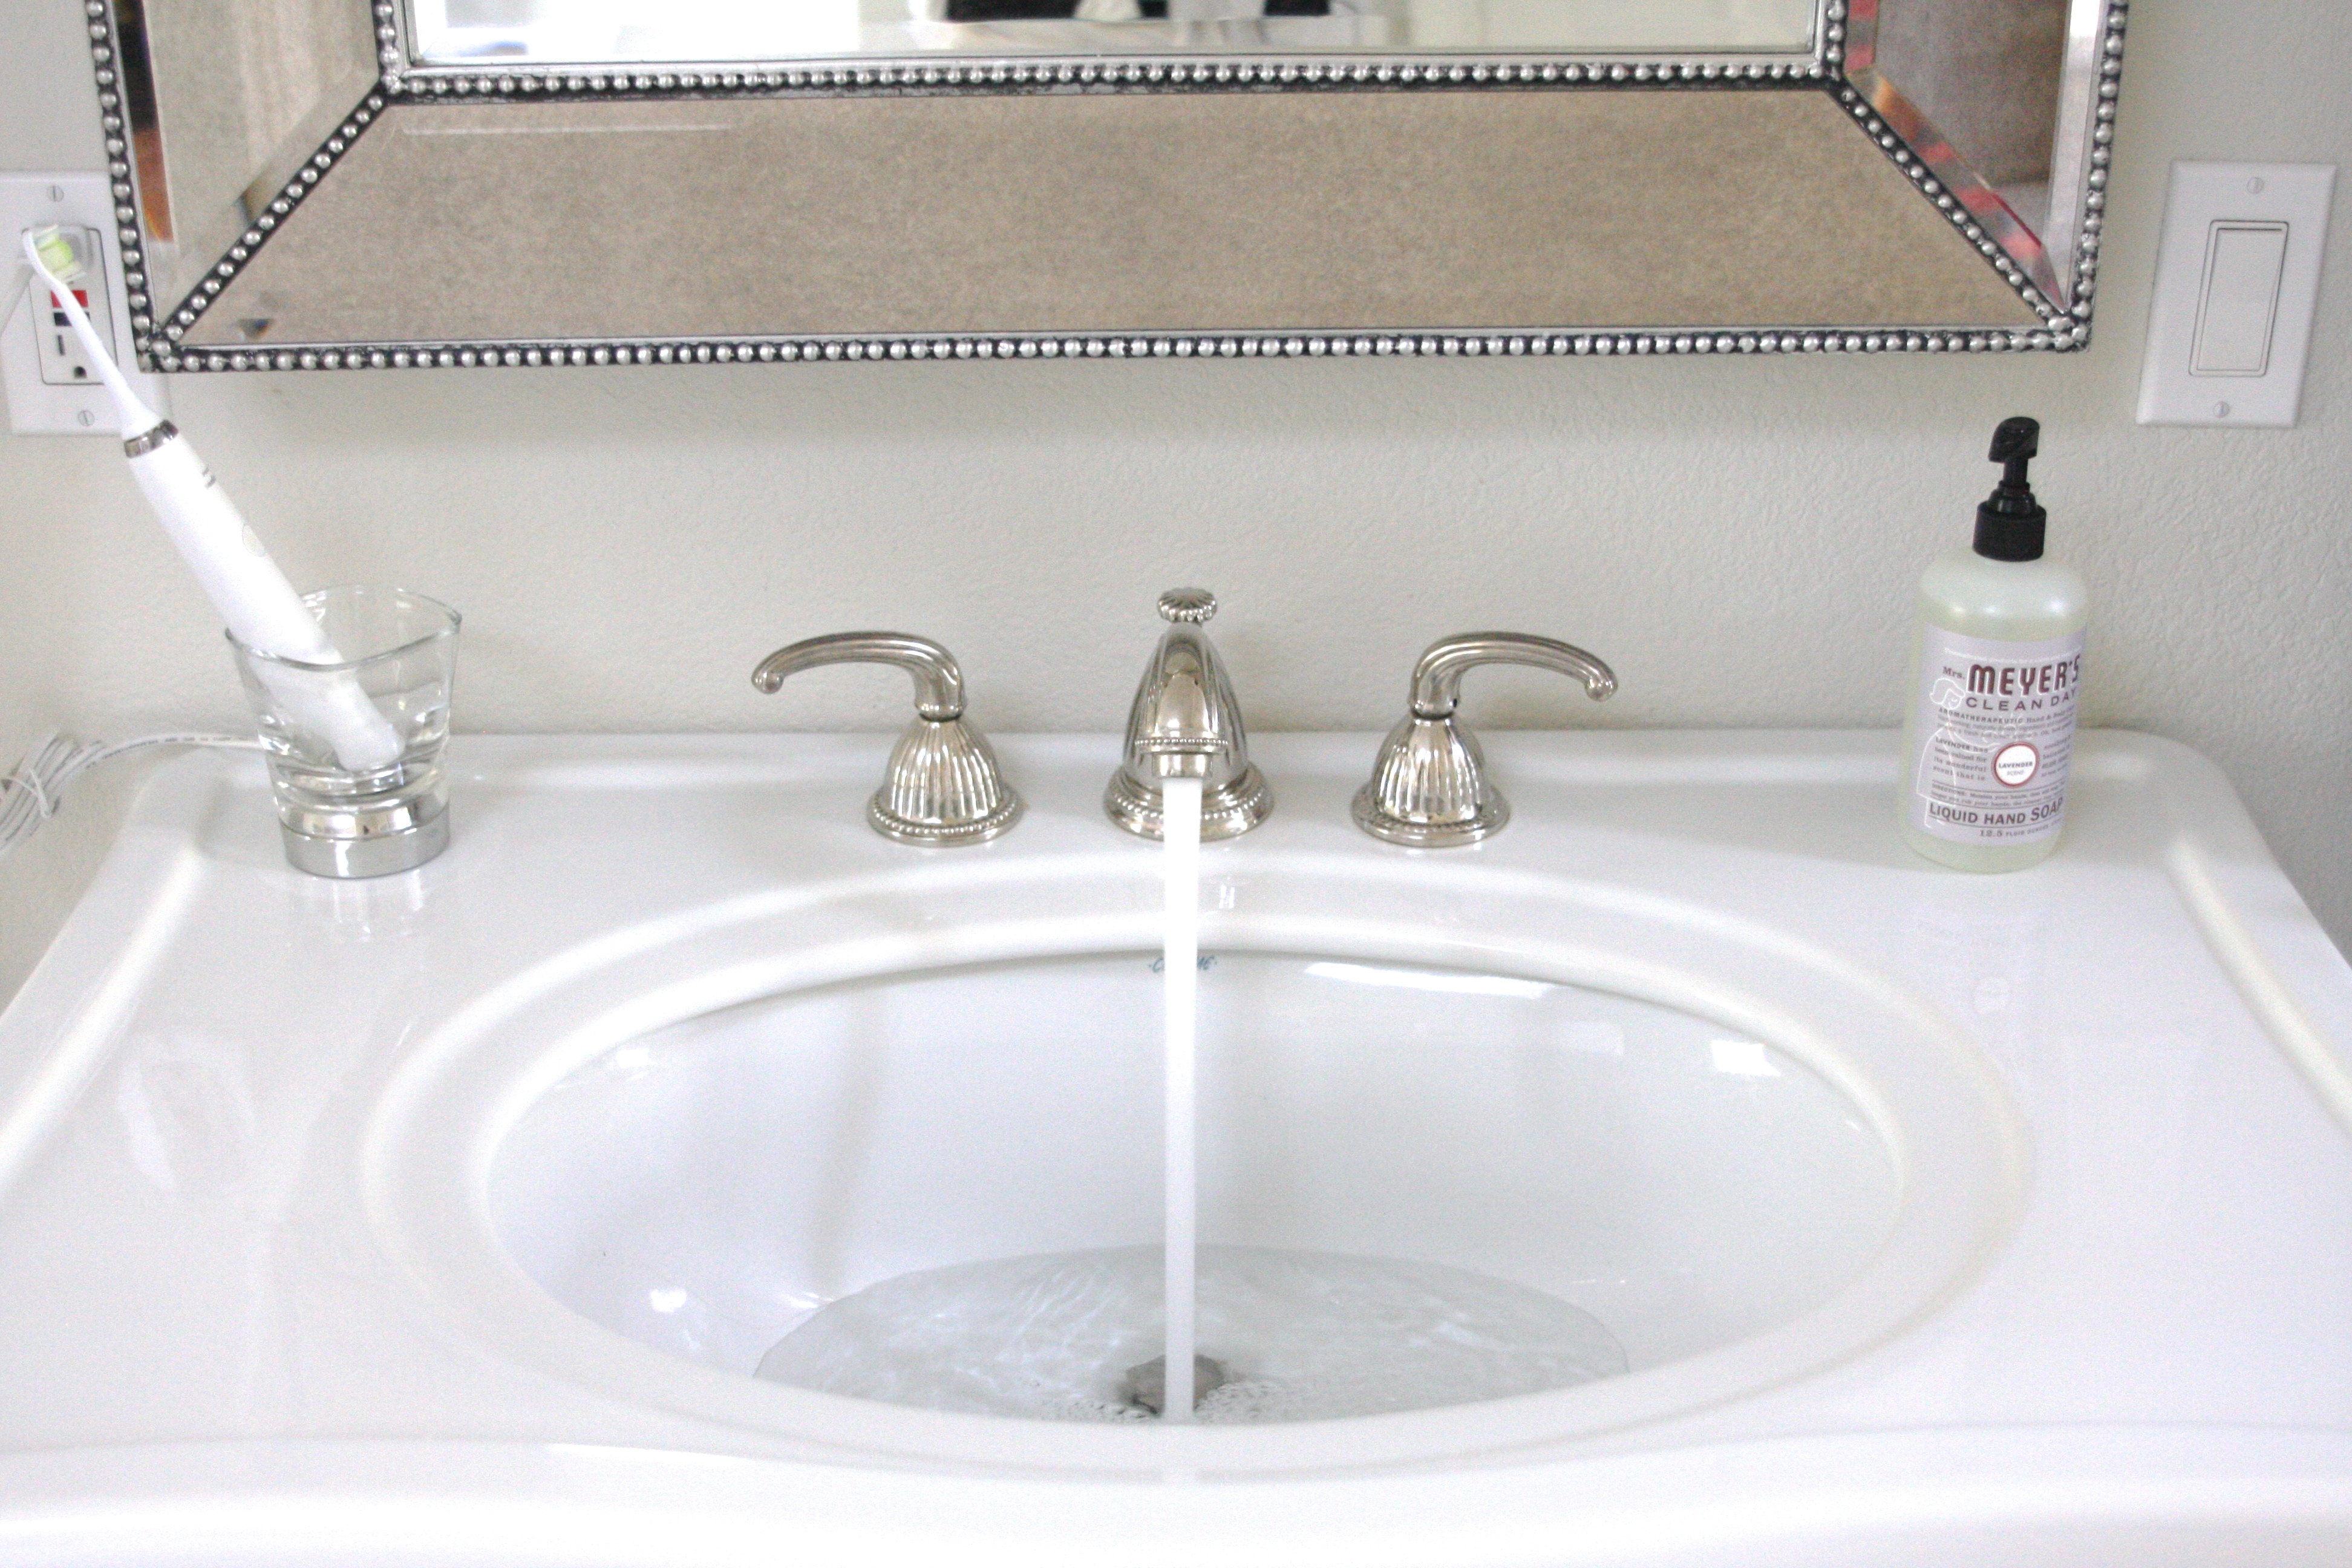 How To Unclog A Sink For Less Than $6 simply organized